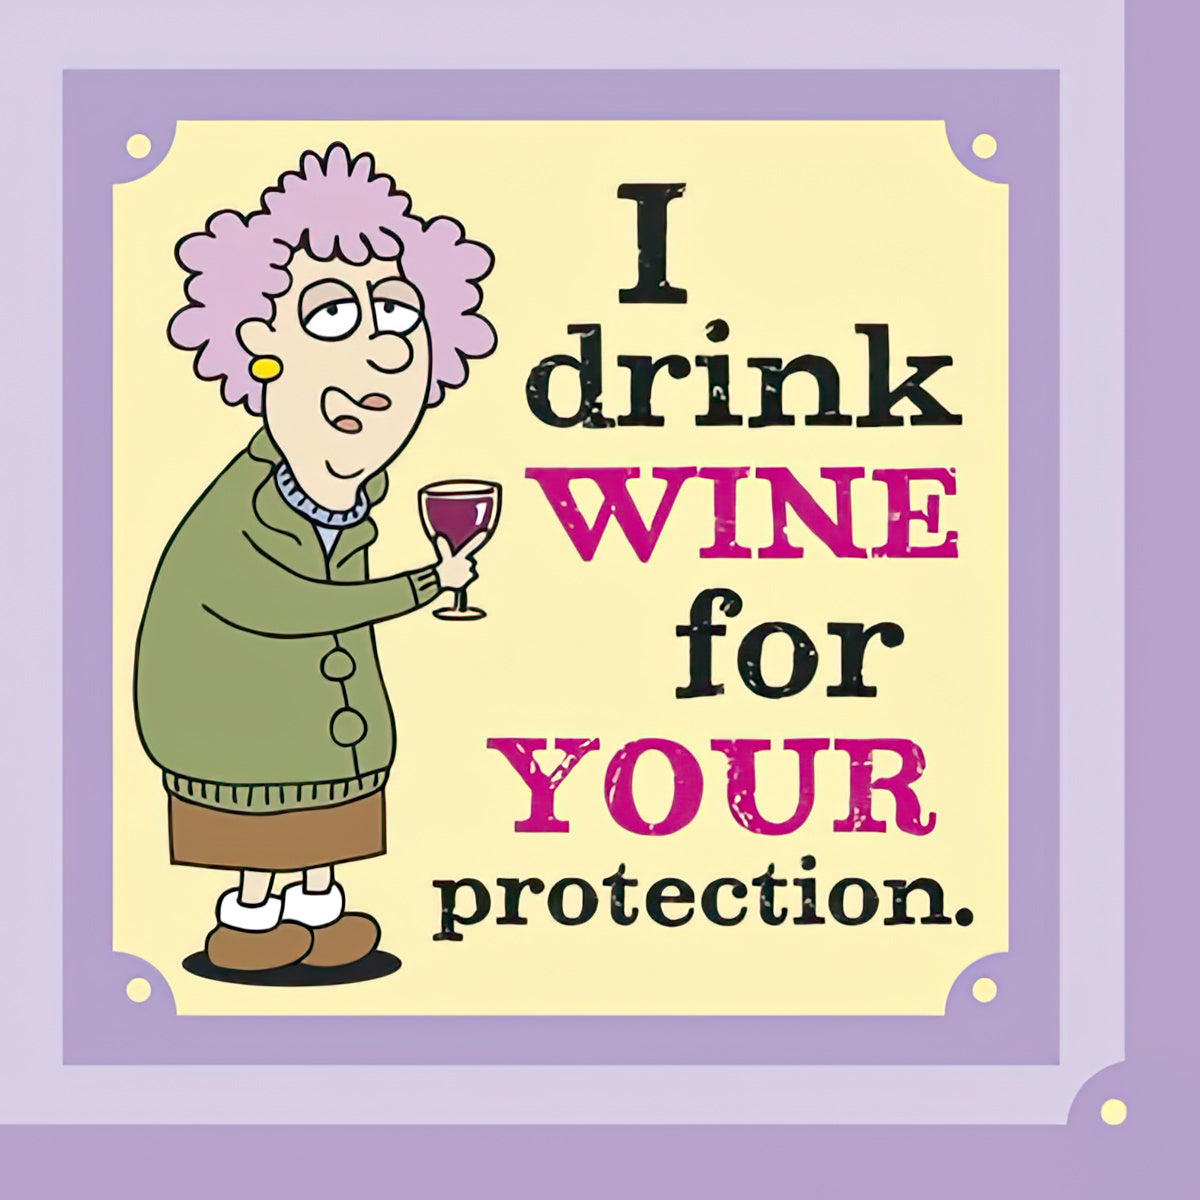 I drink wine for your protection.